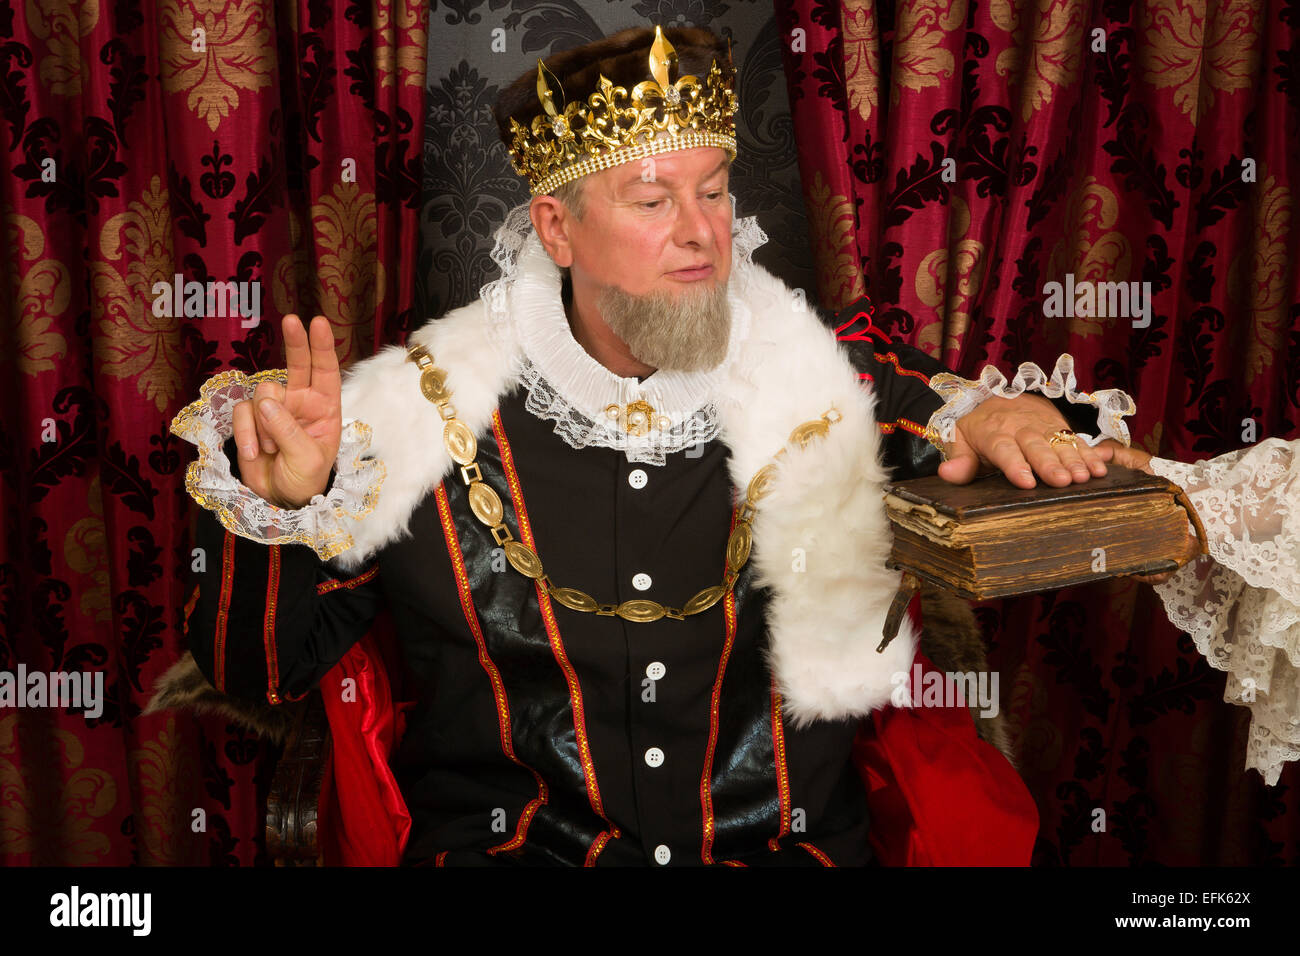 Royal king swearing a solemn oath at his inauguration Stock Photo